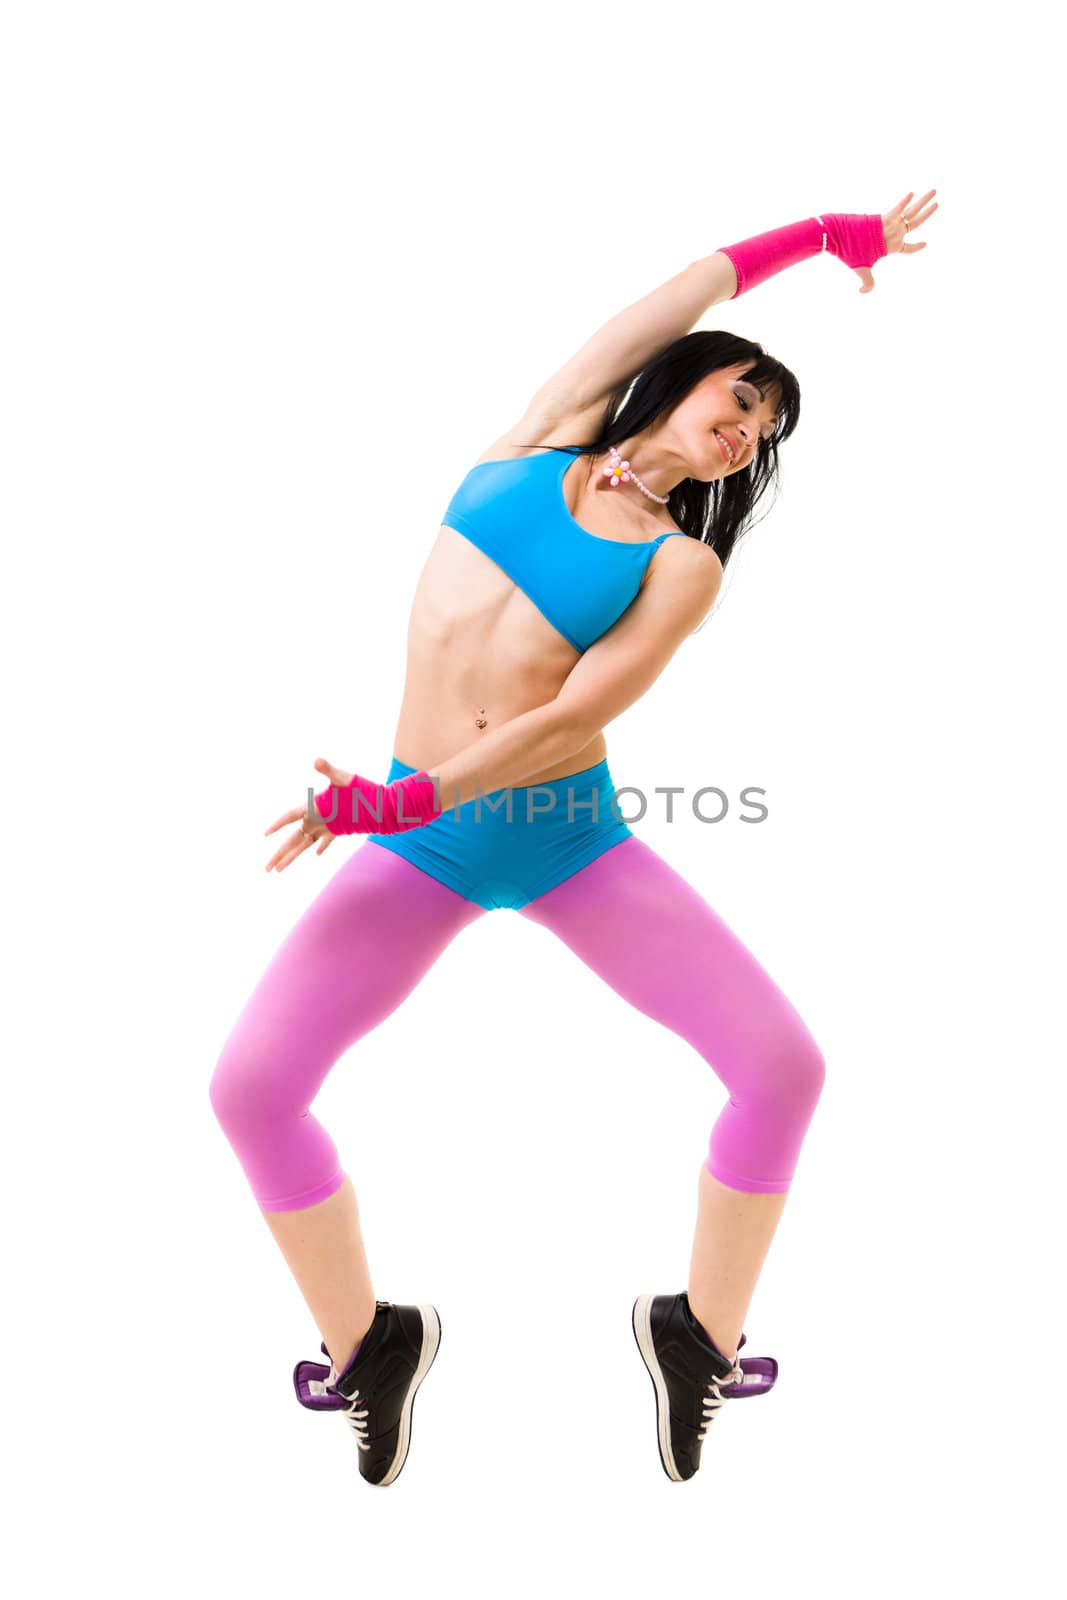 Gymnast woman dancing against isolated white background